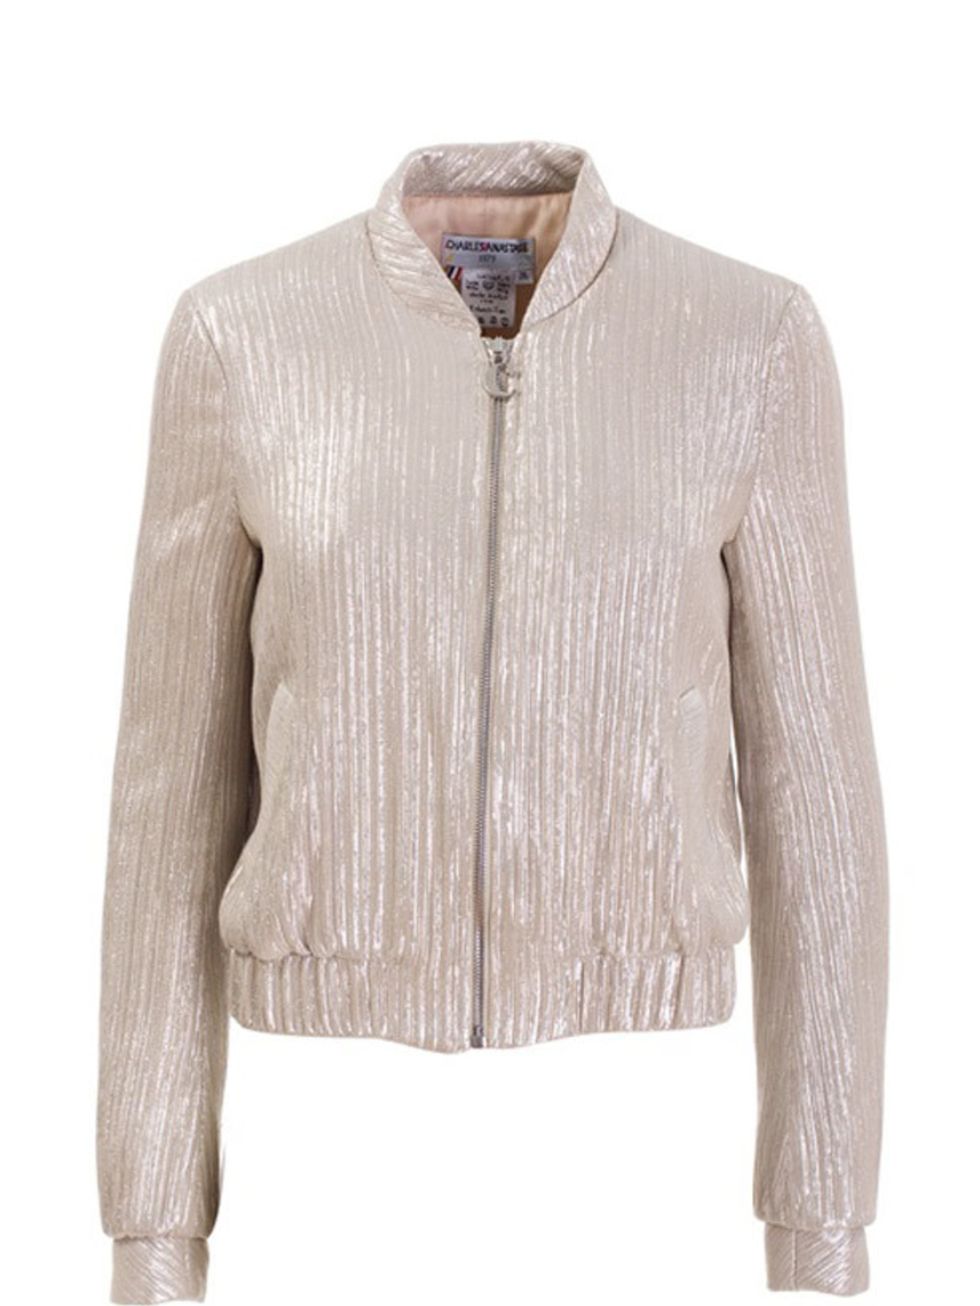 <p>Shimmer zip jacket, £959, by Charles Anastase at <a href="http://www.farfetch.com/shopping/women/search/schid-636861726c657320616e617374617365/items.aspx">Farfetch</a> </p>